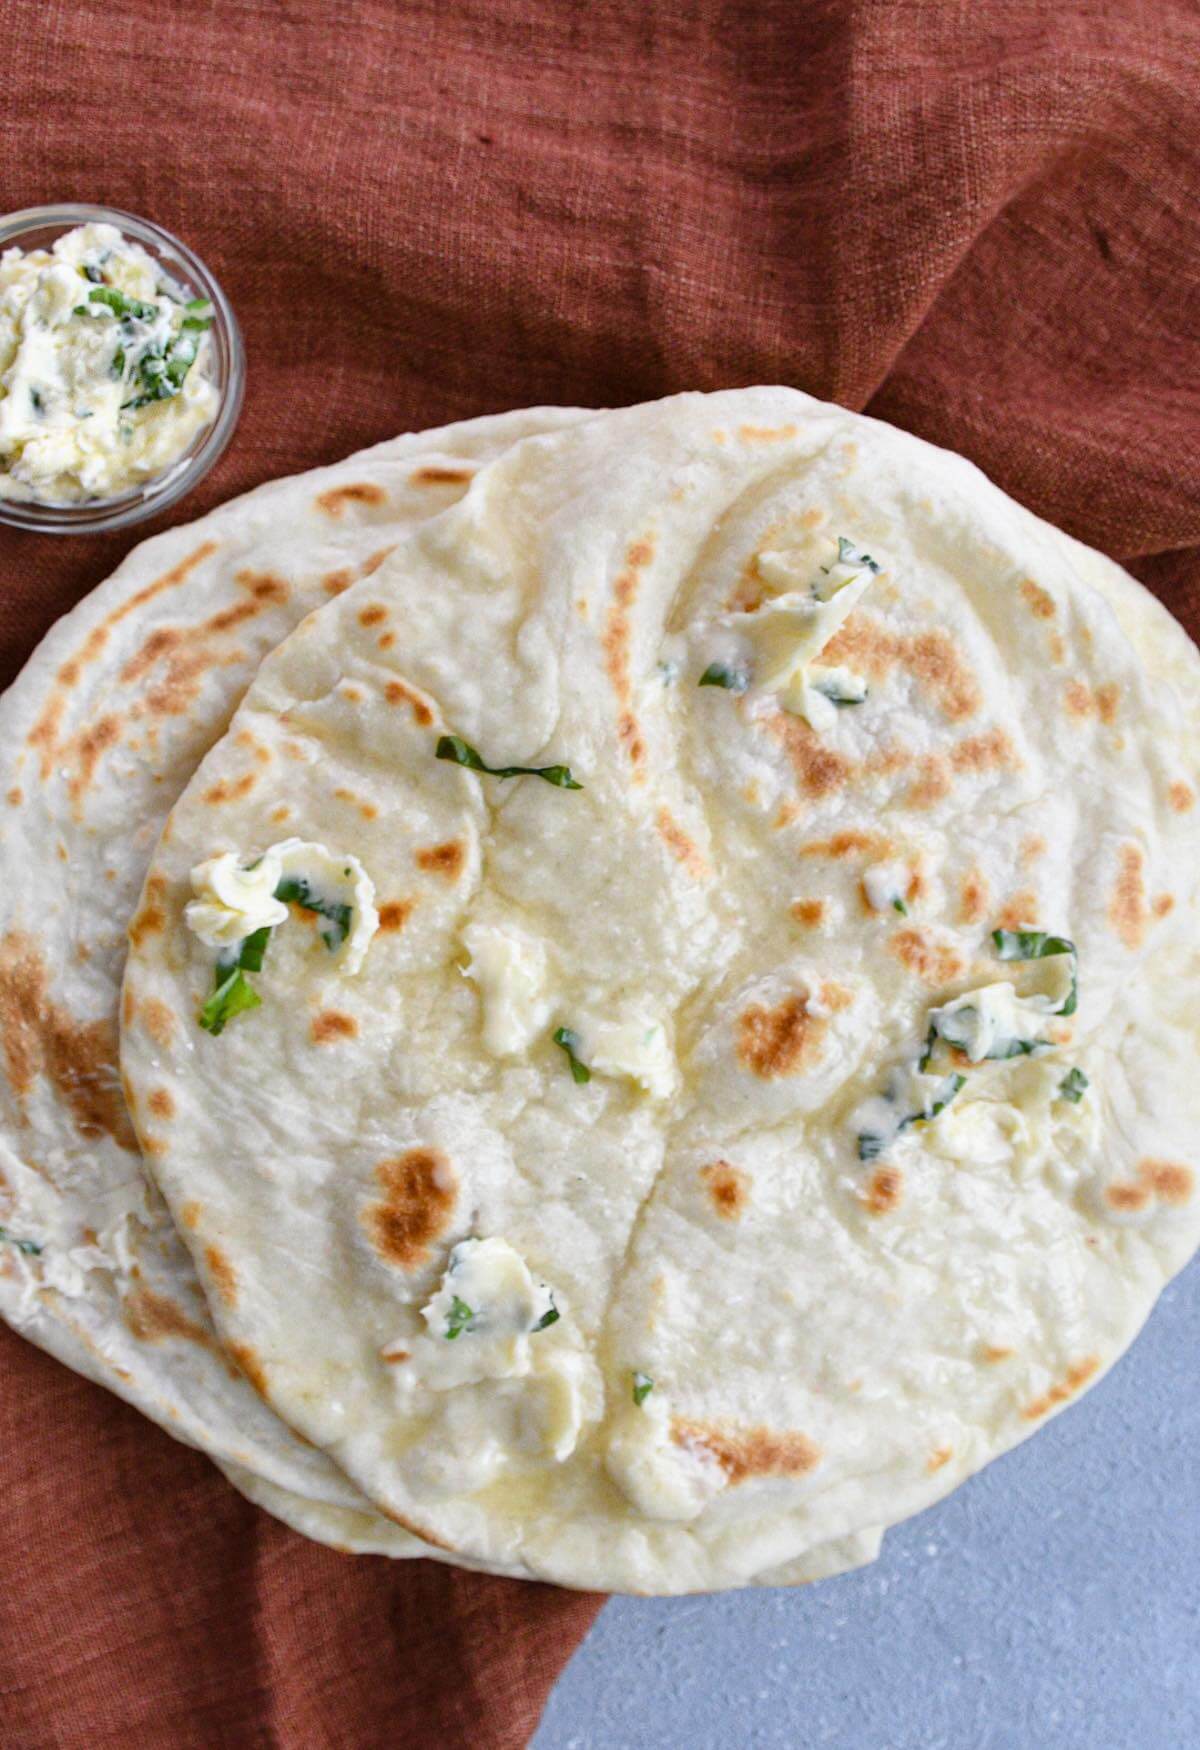 pita bread brushed with herb garlic butter.